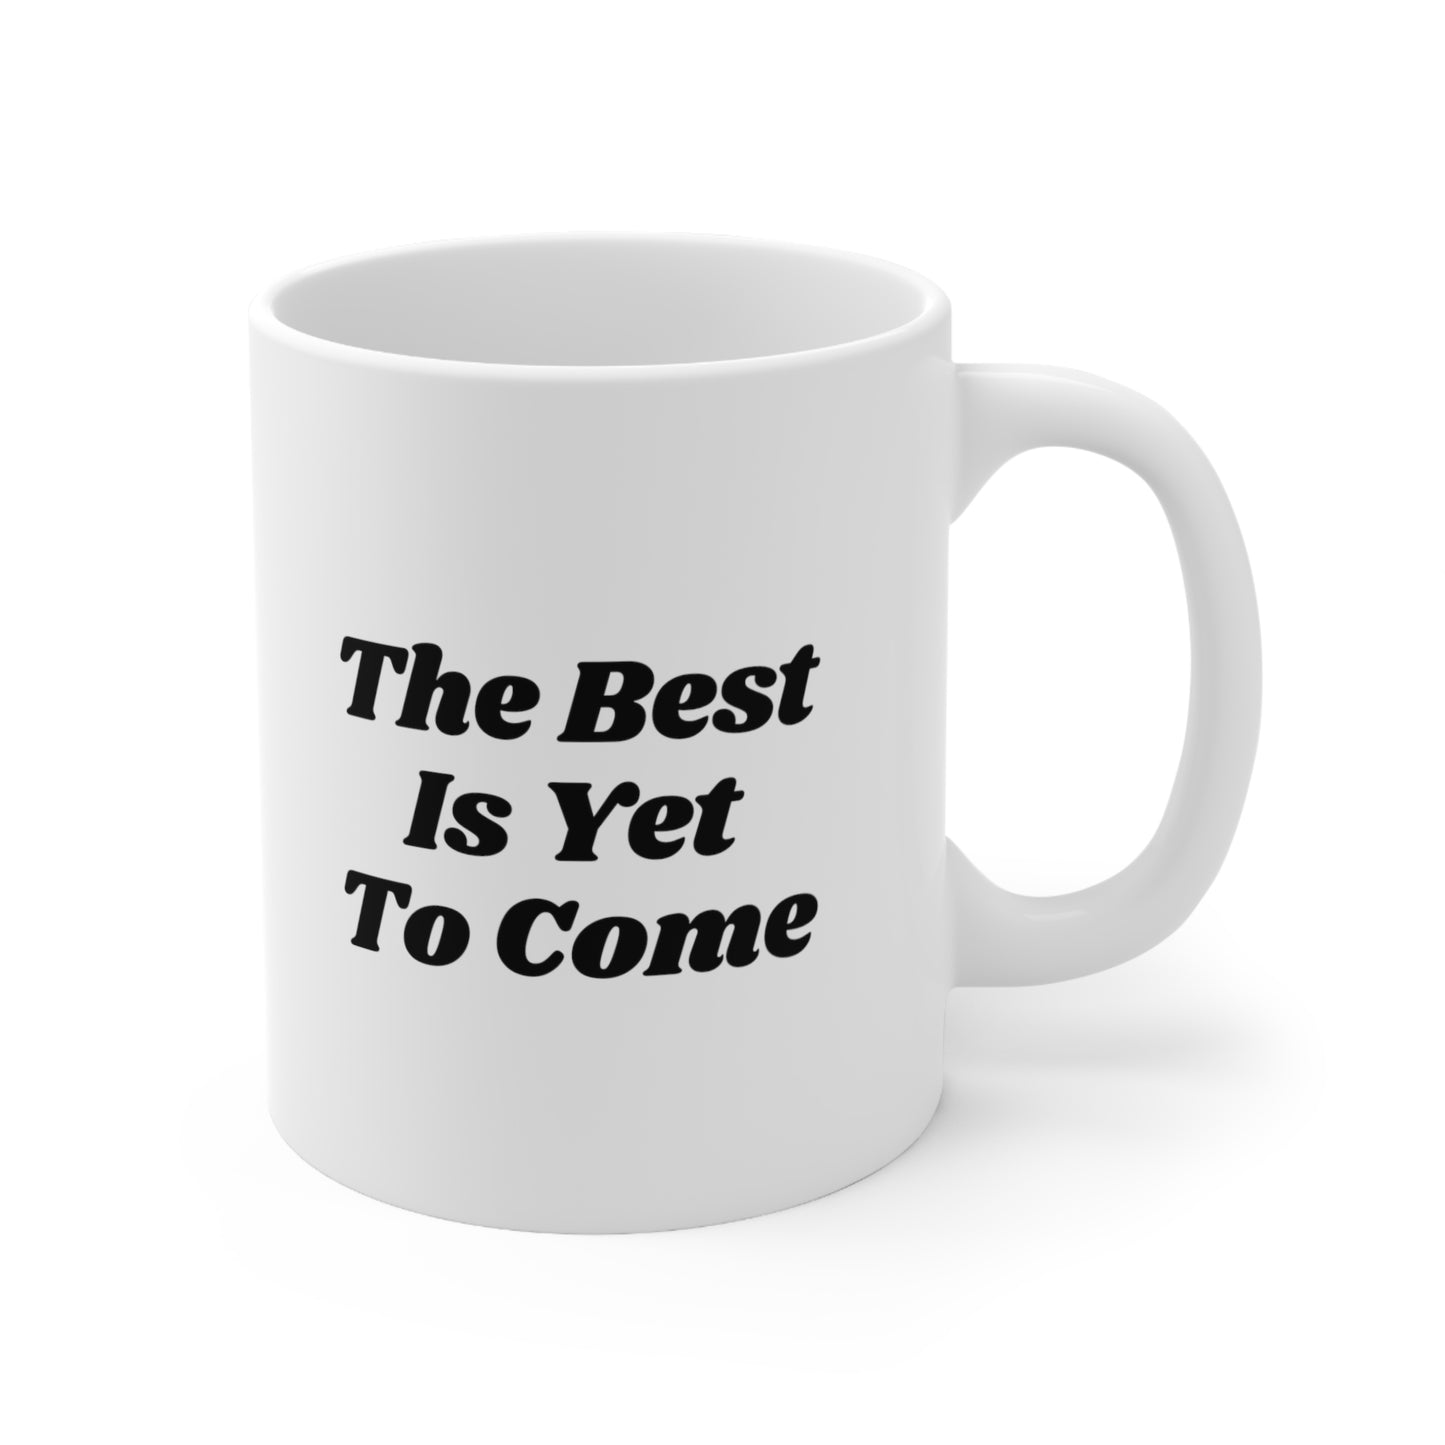 The Best Is Yet To Come Coffee Mug 11oz